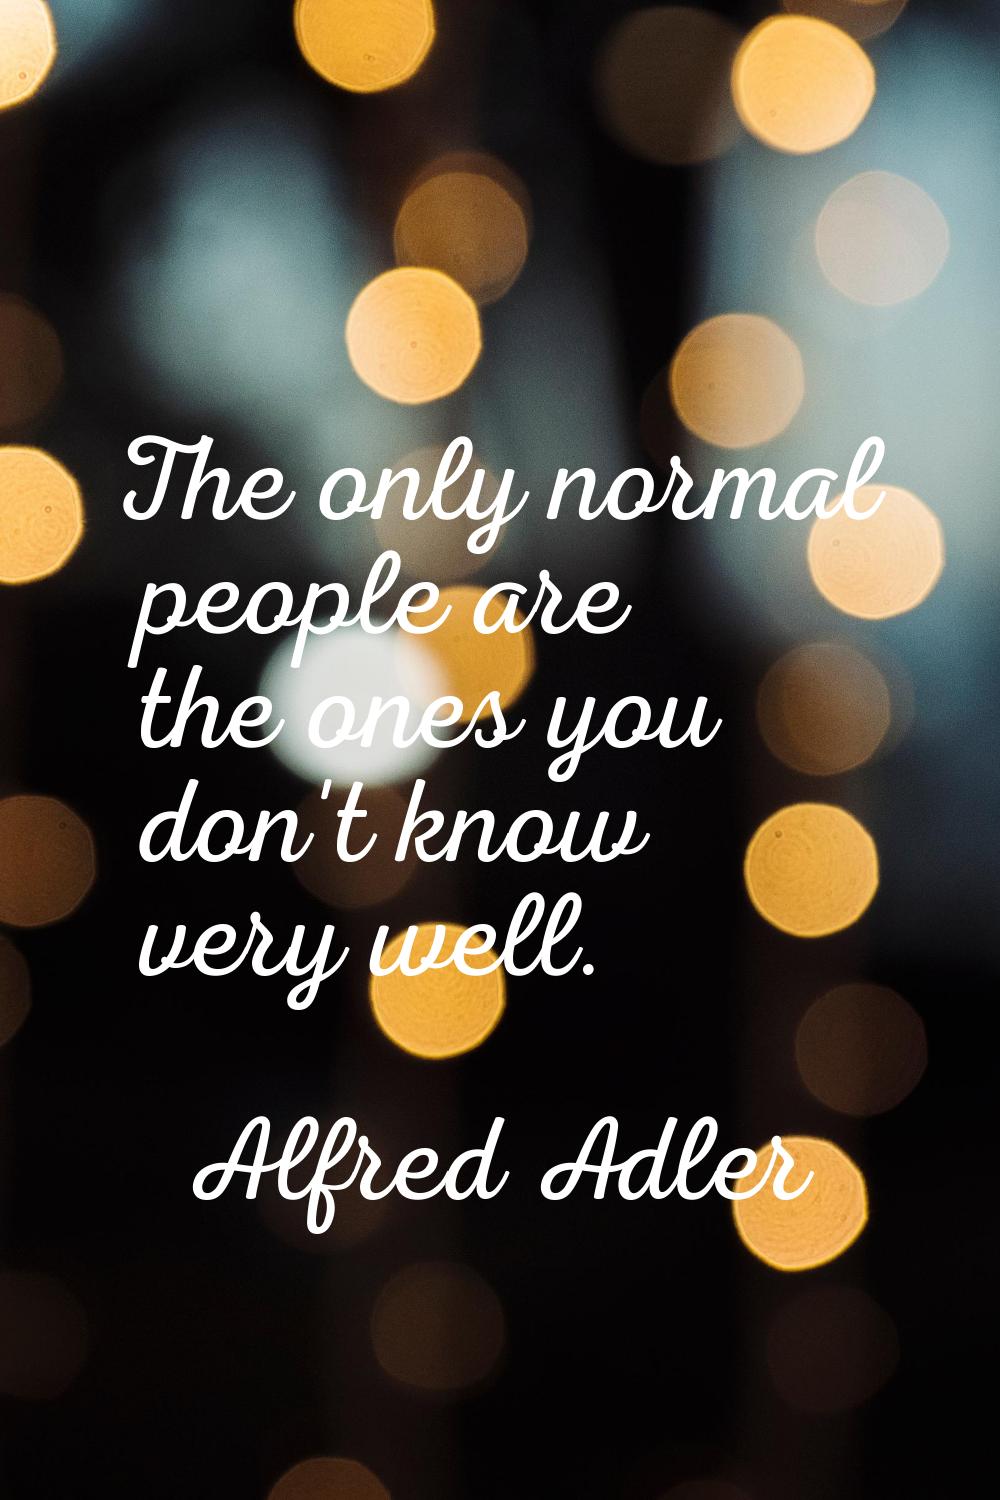 The only normal people are the ones you don't know very well.